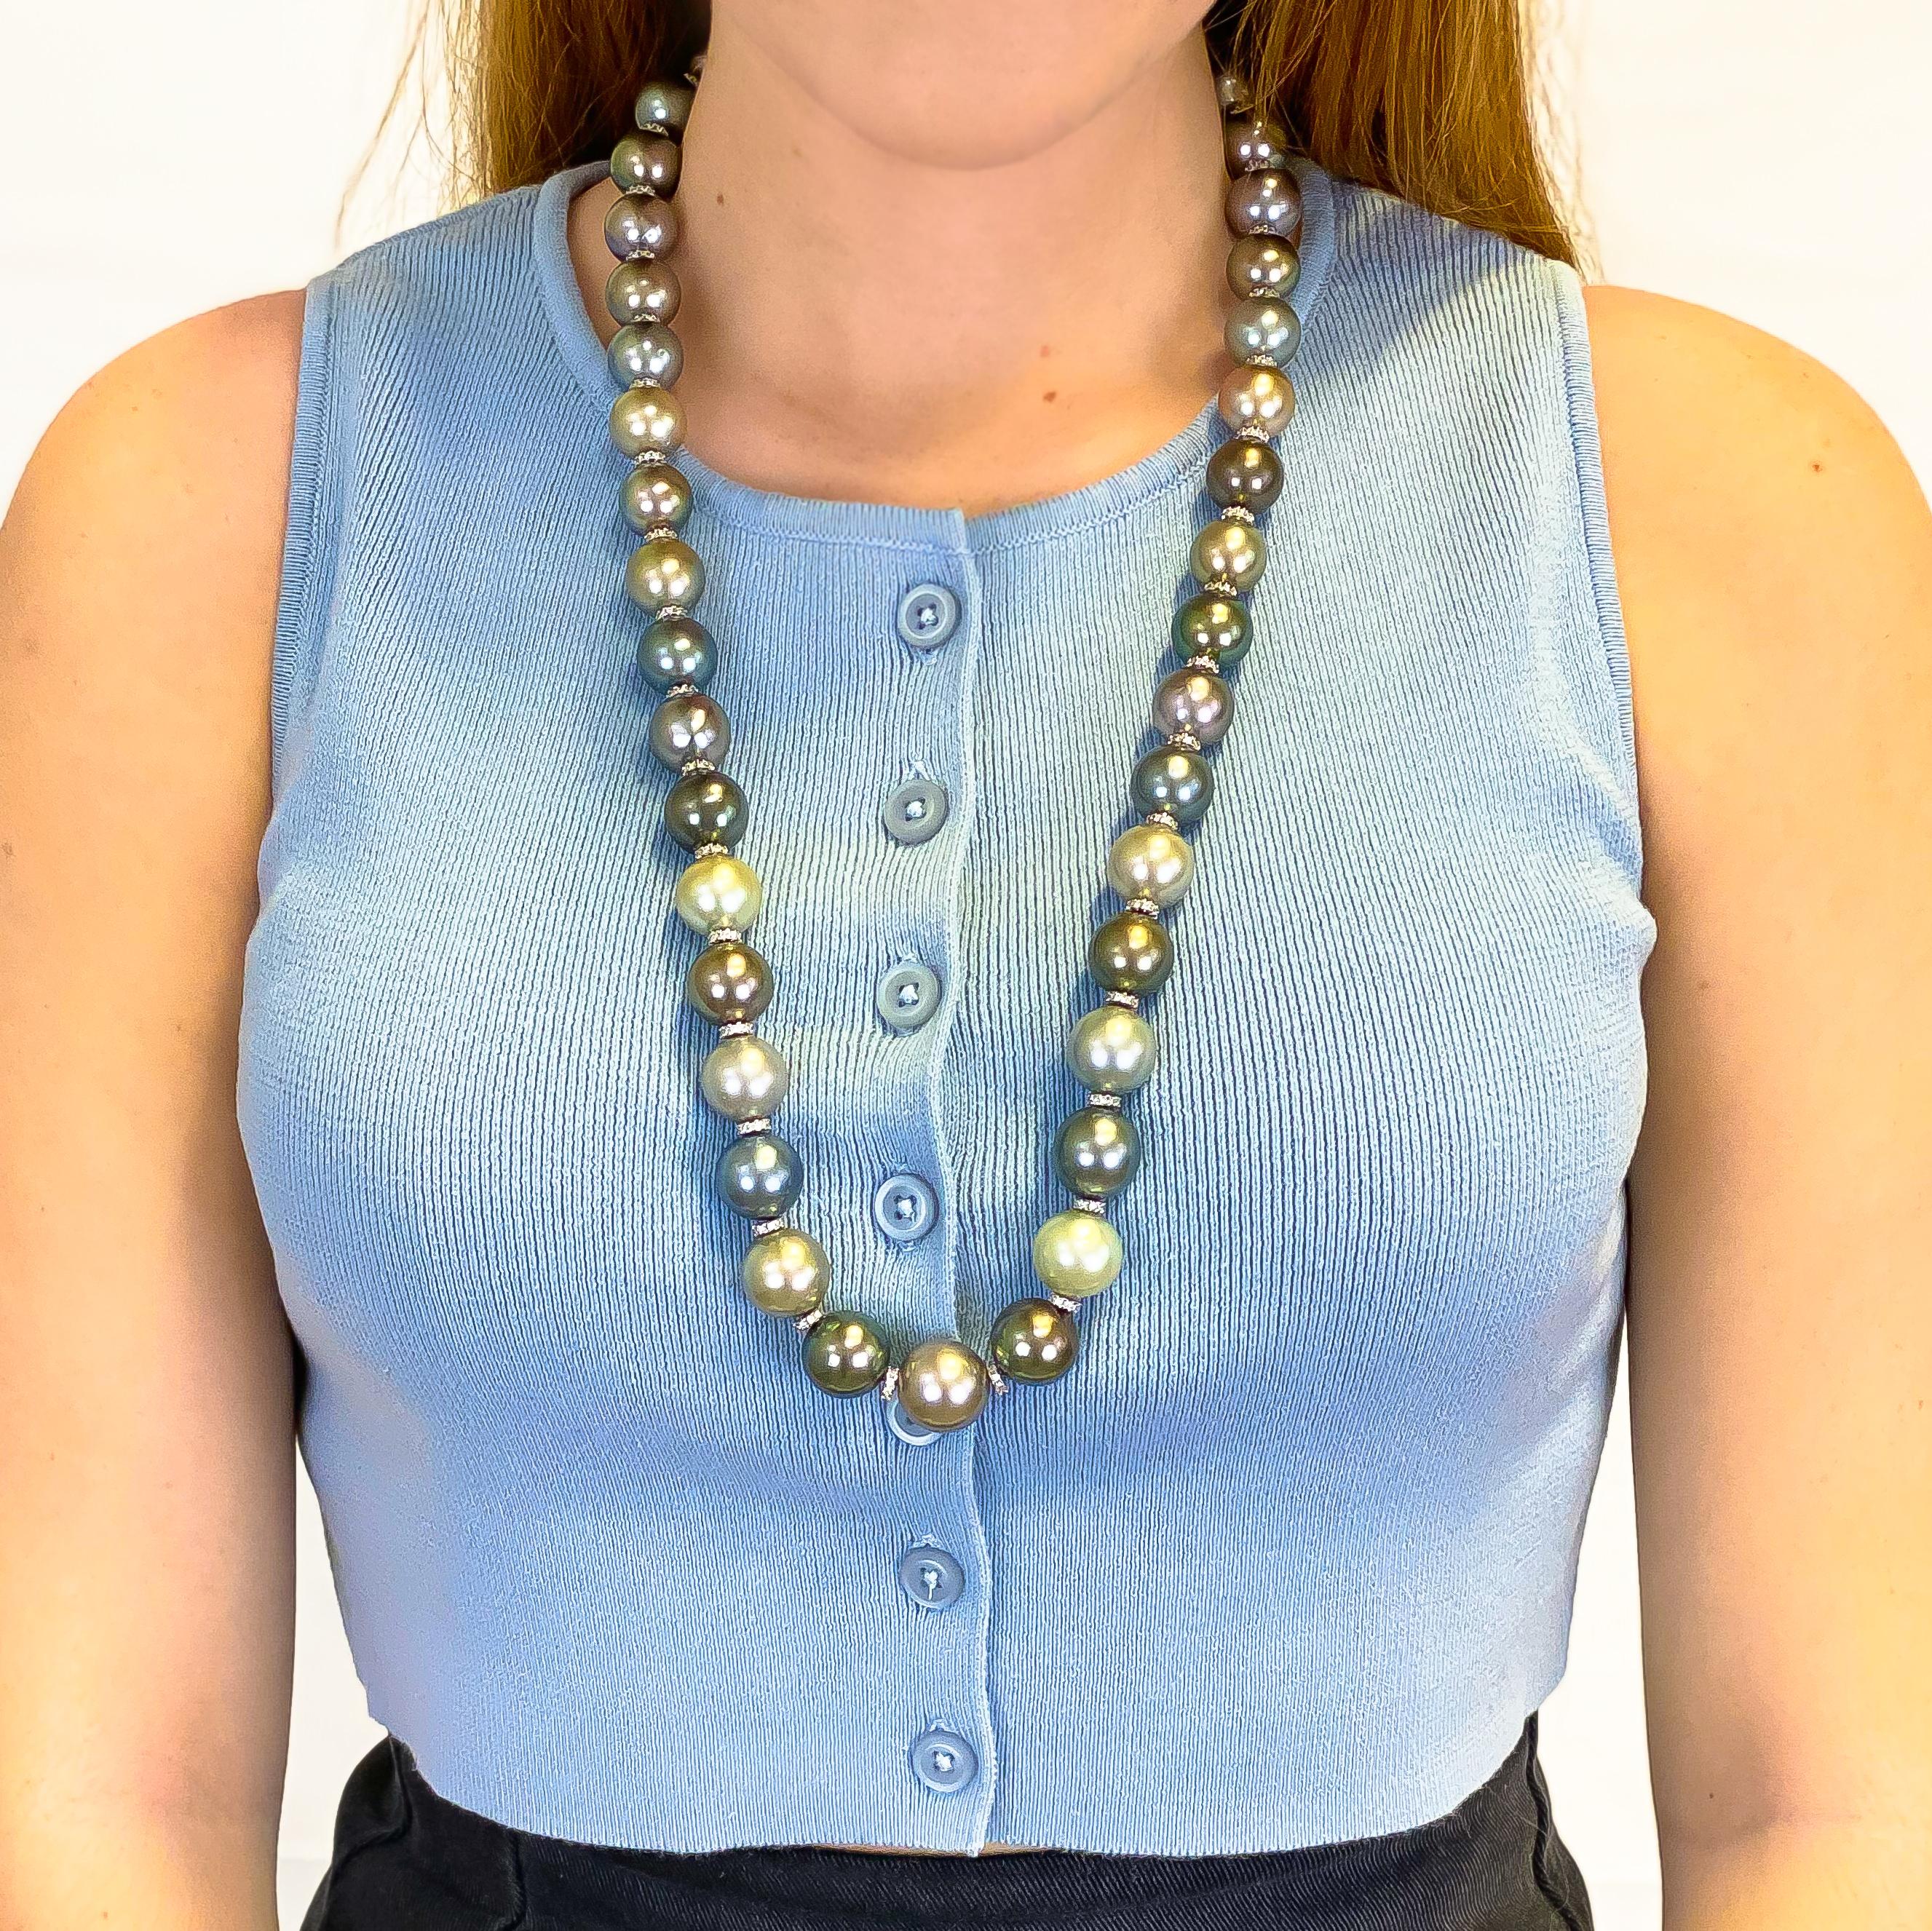 Natural Tahitian Pearls = 13.50 - 17.50 millimeters

Length = 27 Inches

Jewelry Gift Box Included